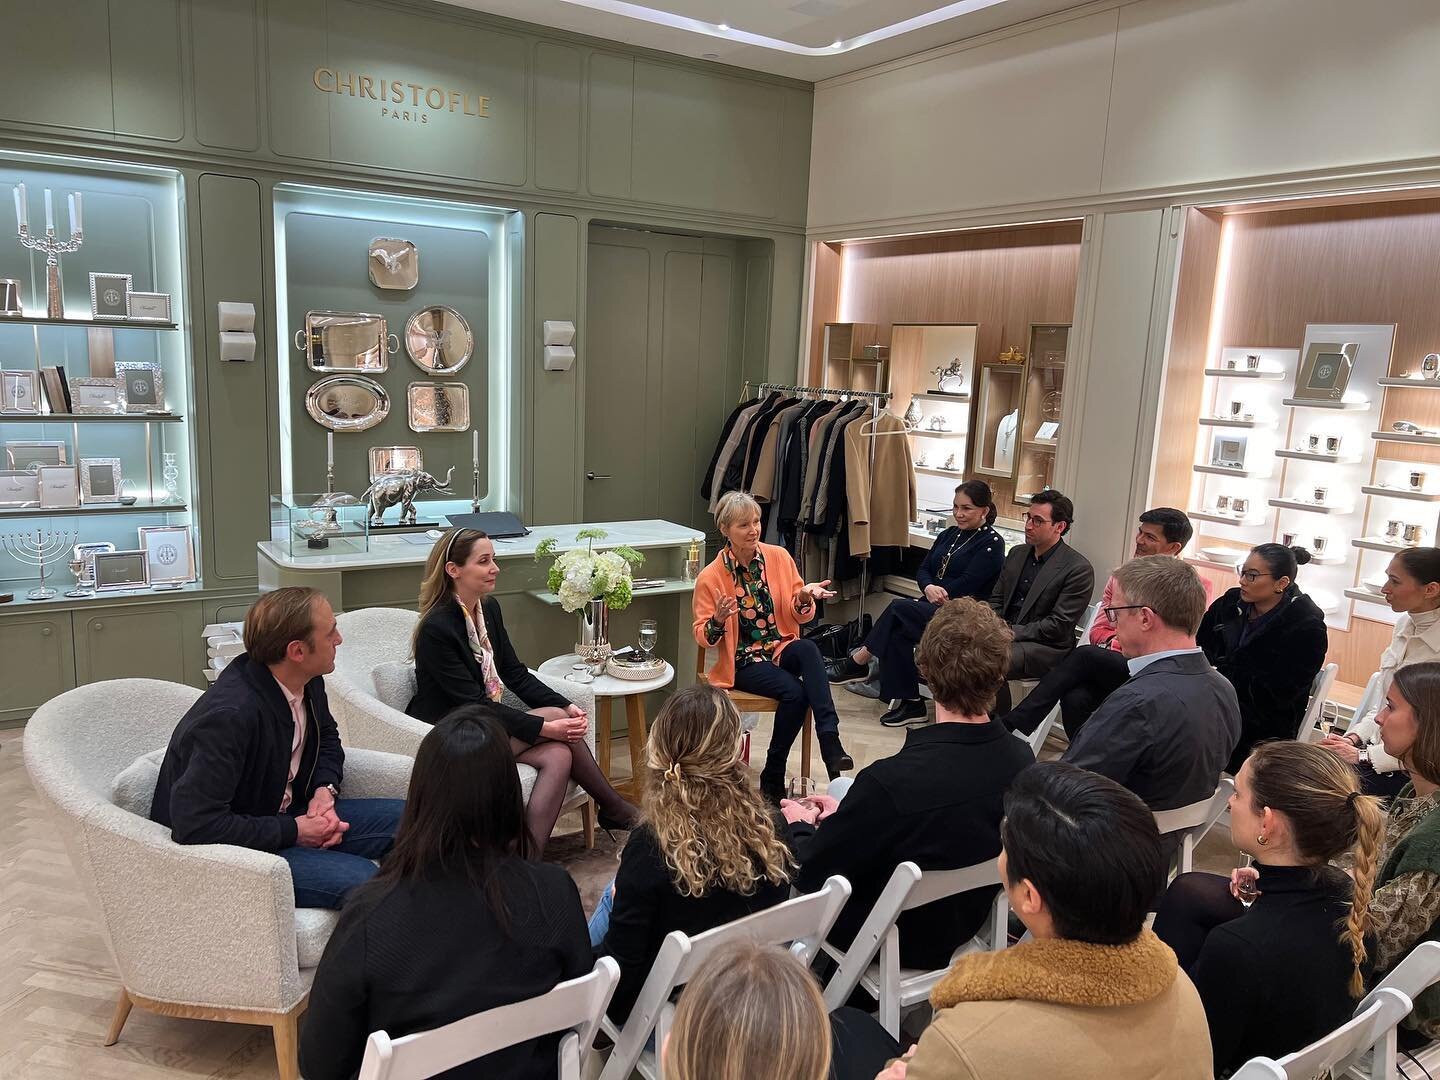 LEF hosted an Executive Leadership Exchange in collaboration with @christofle on the topic of experiential luxury in the US, with speakers Pierre-Antoine Bollet, GM of @christofle, and Melanie Rehbein, Manager of @baccarathotels New York. Thank you t